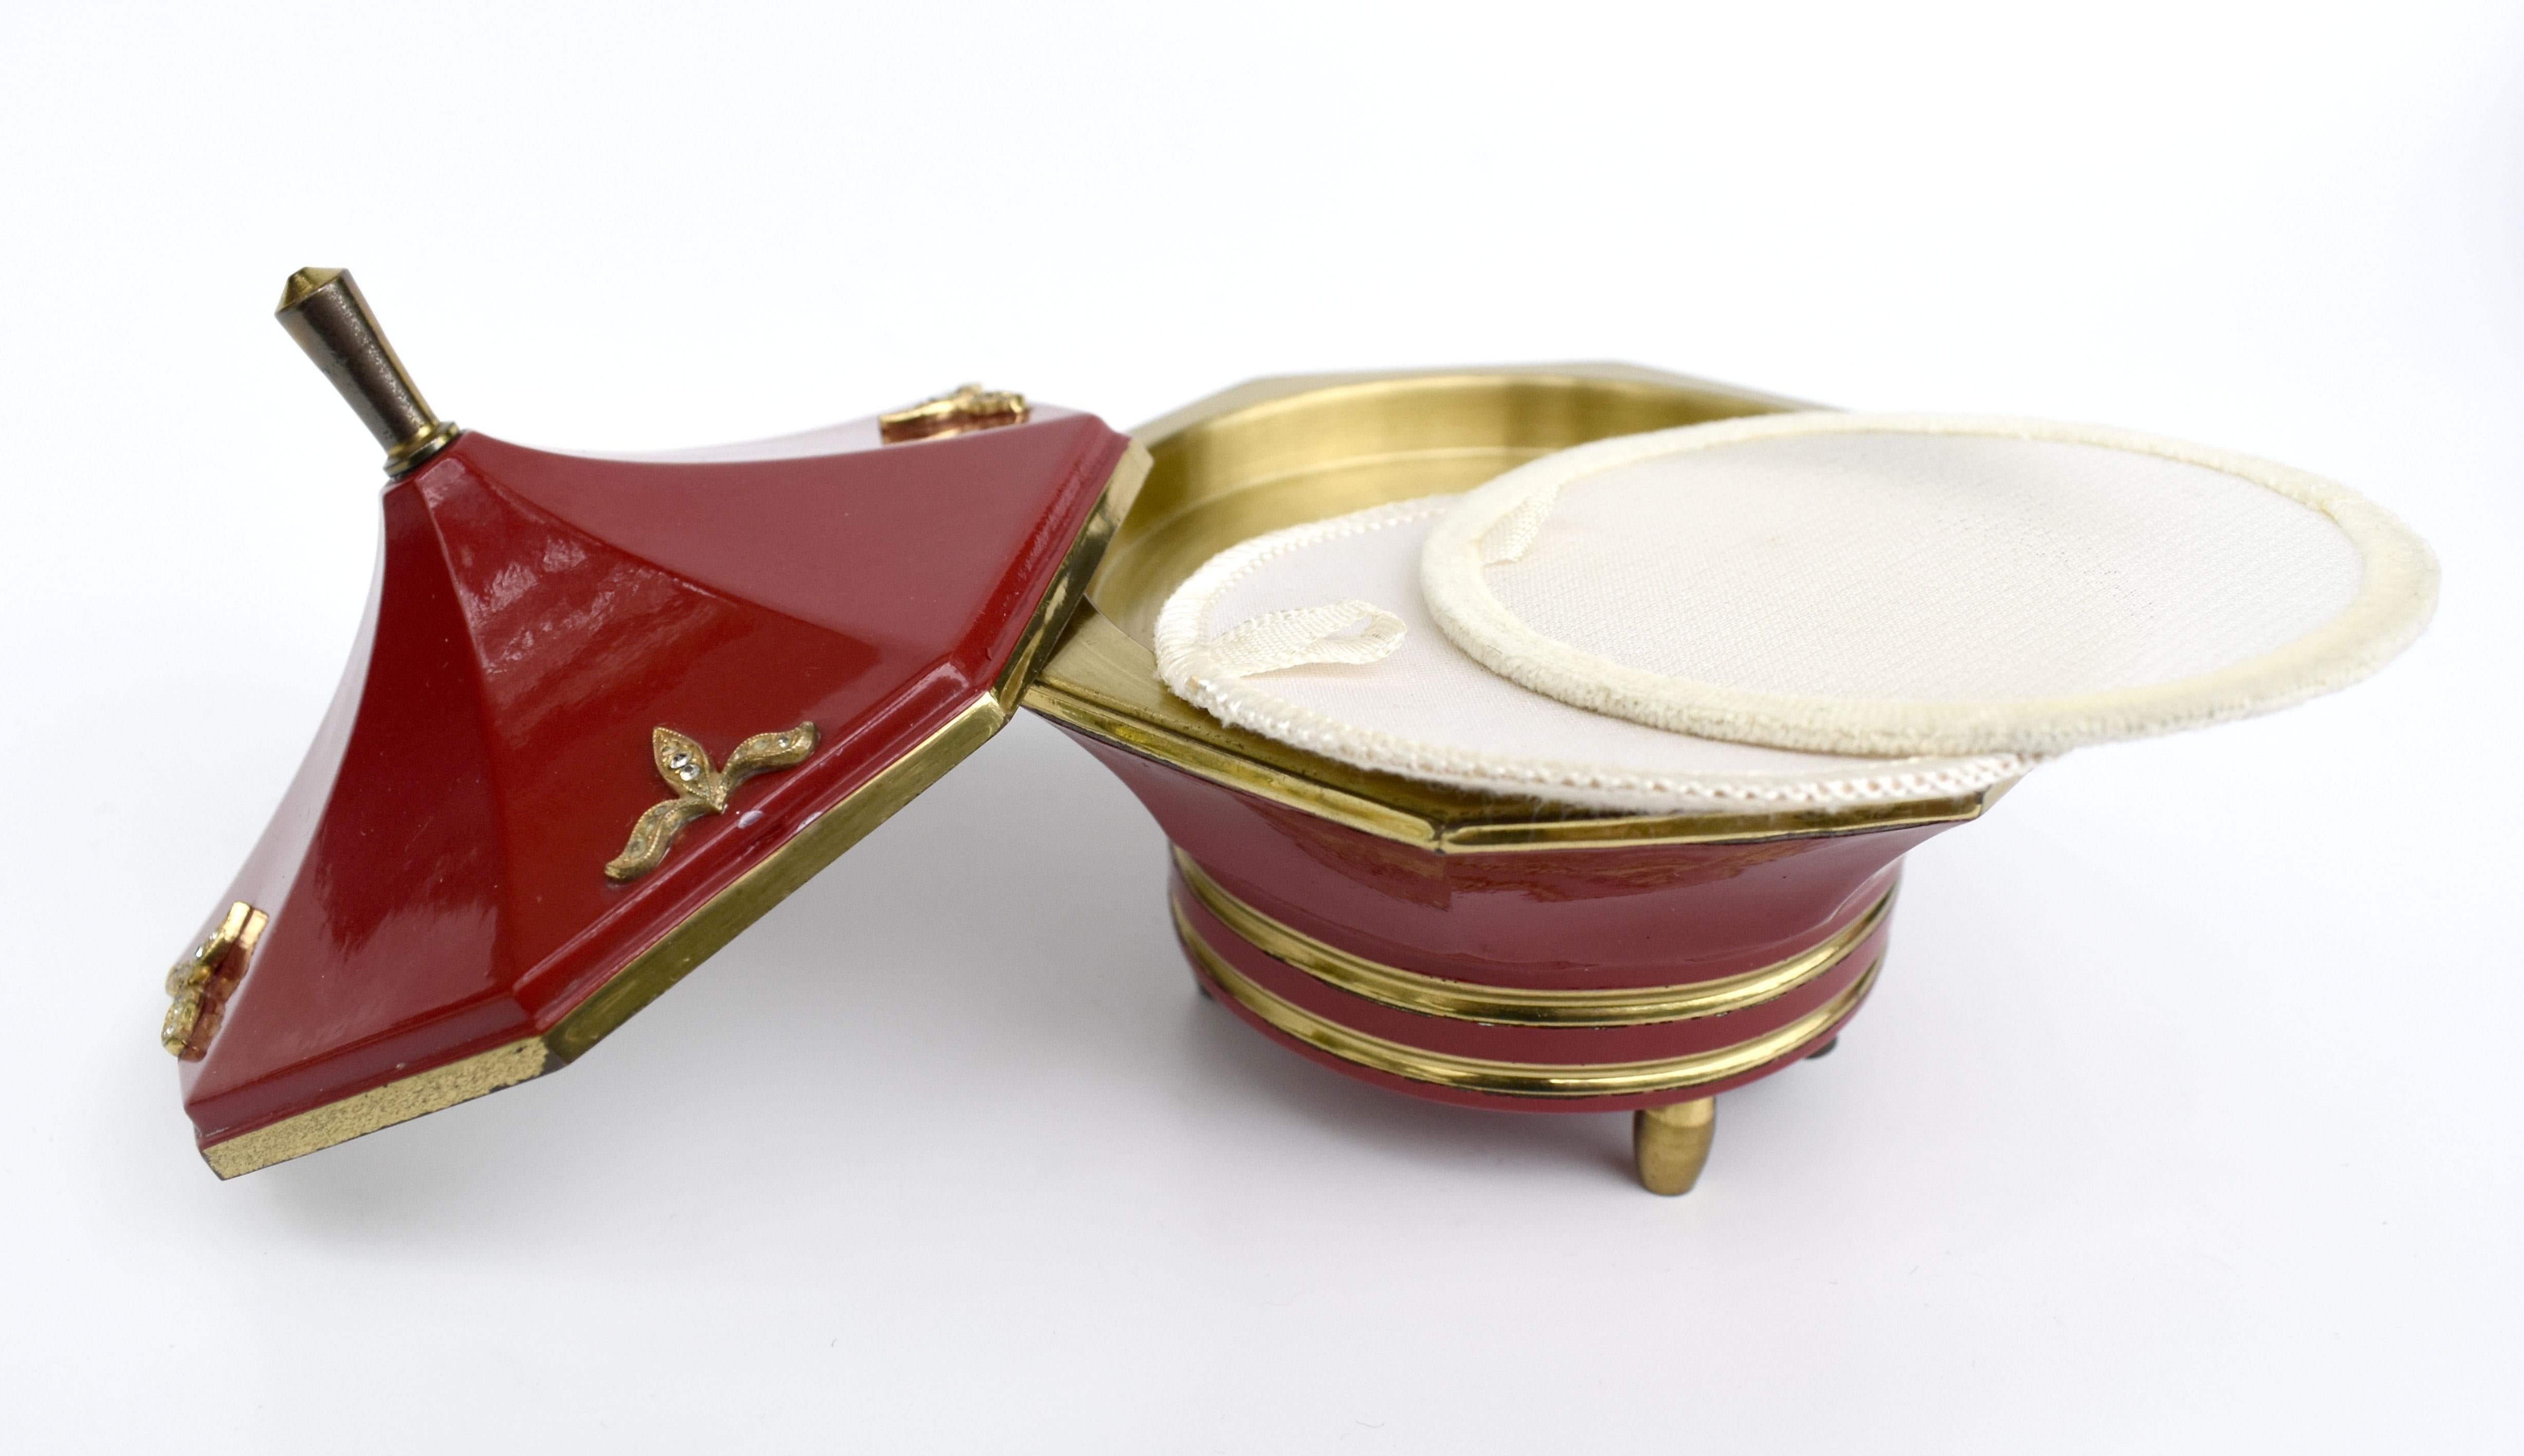 Beautiful Art Deco ladies musical powder box. It appears to not have ever been used and as such is in remarkable condition. Bright red enamel exterior with gold accents to the edges and feet. The interior is also brass and in mint unused condition.